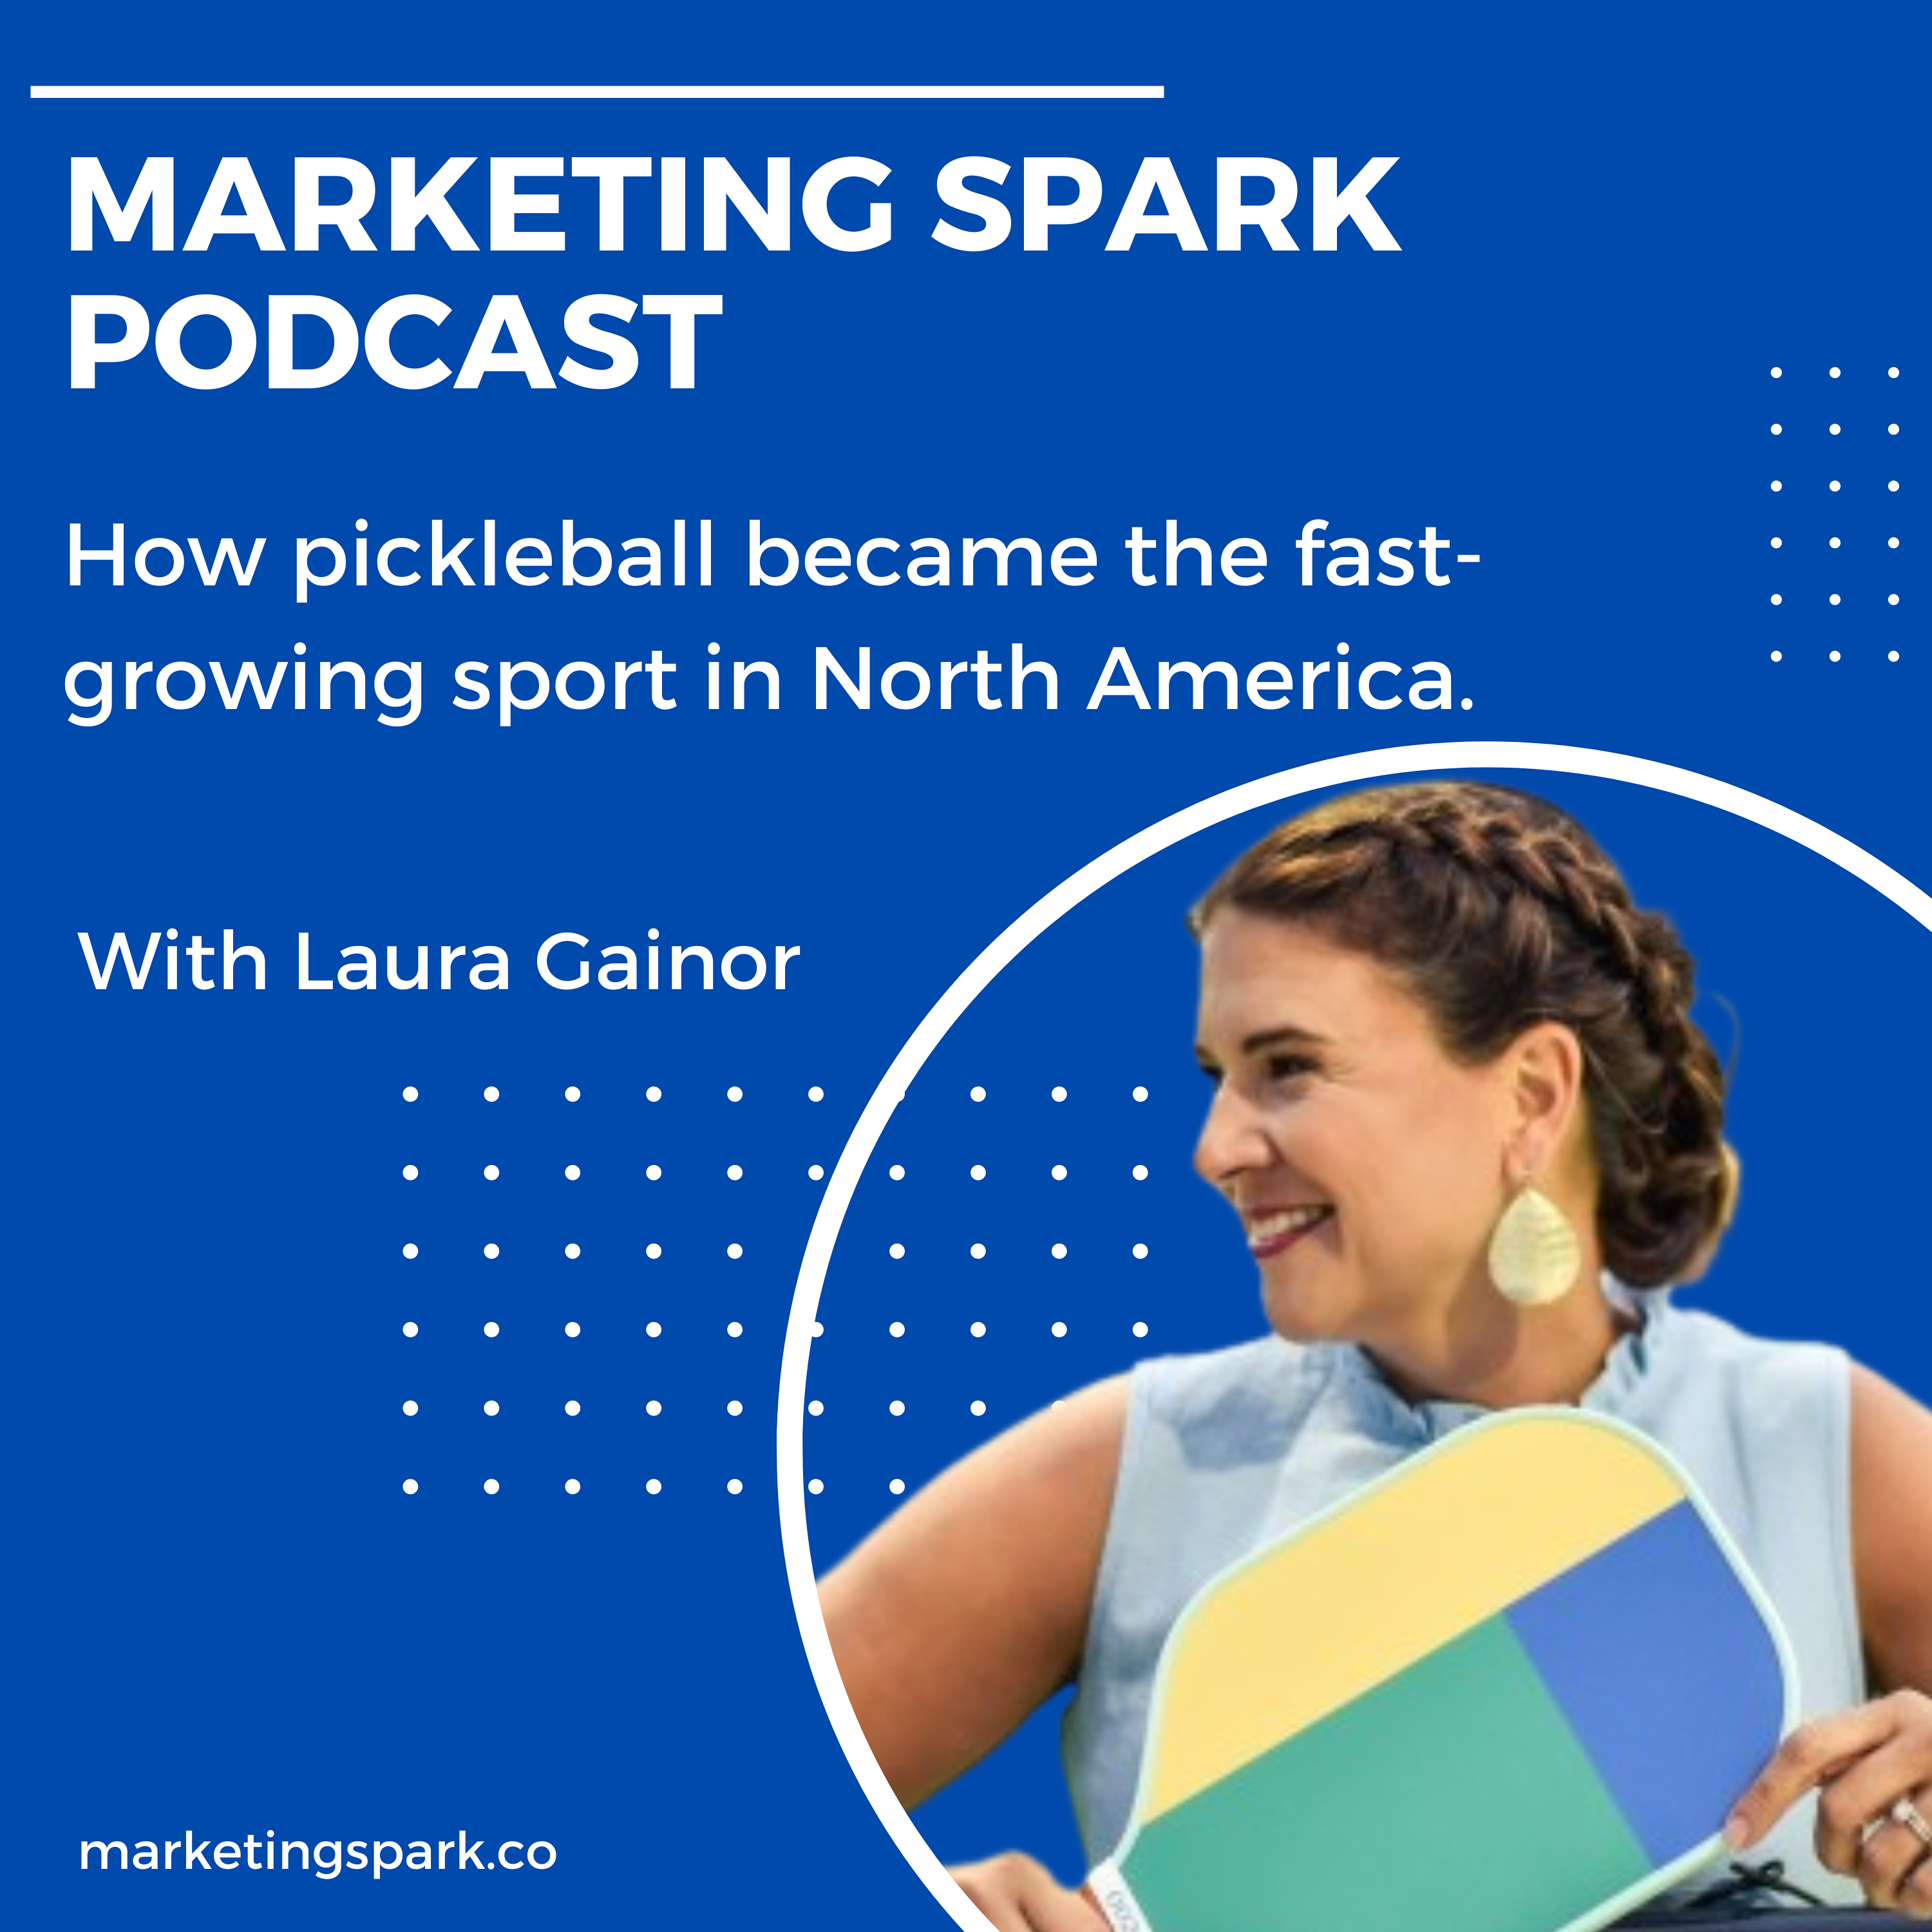 The Positioning and Branding Story Behind Pickleball: Laura Gainor